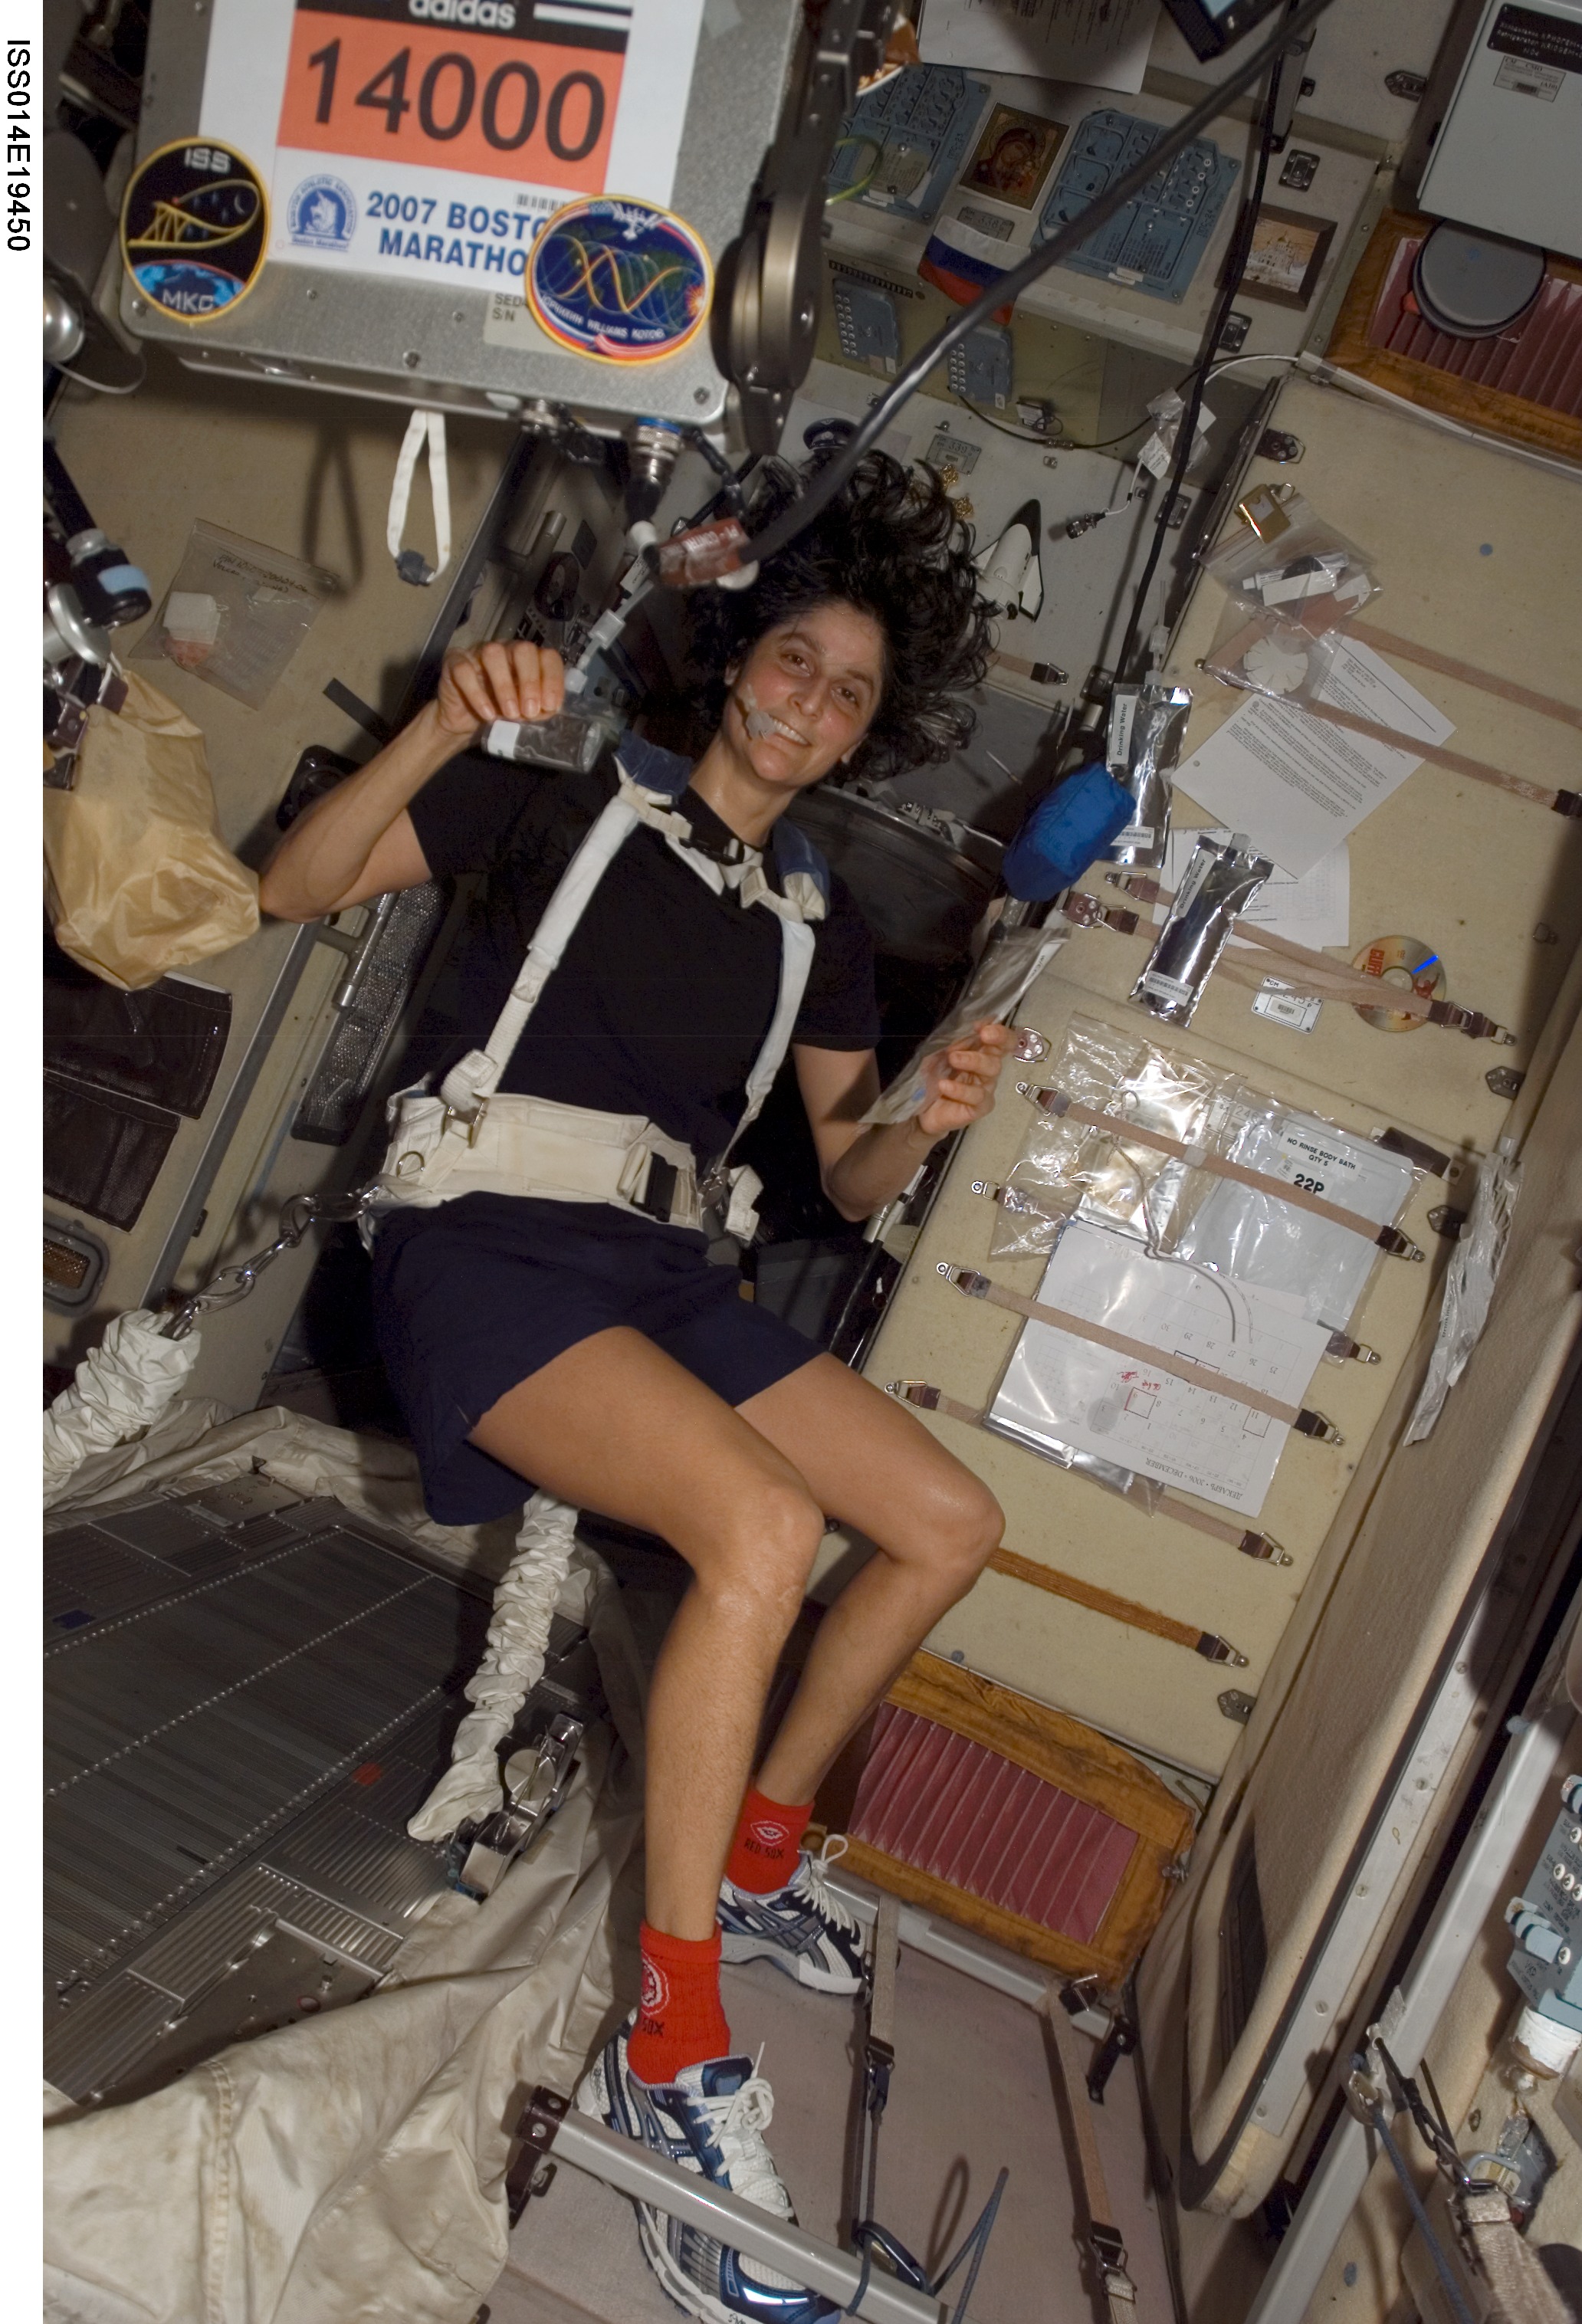 Astronaut Sunita L. Williams, Expedition 14 flight engineer, circled Earth almost three times as she participated in the Boston Marathon from space. She is seen here with her feet off the station treadmill on which she ultimately ran about six miles per hour while flying more than five miles each second. The treadmill is called TVIS, for Treadmill Vibration Isolation System, by the crewmembers and their ground support team. Williams' official completion time was four hours, 23 minutes and 10 seconds as she completed the race at 2:24 p.m. (EDT). Image Caption and Credit: NASA